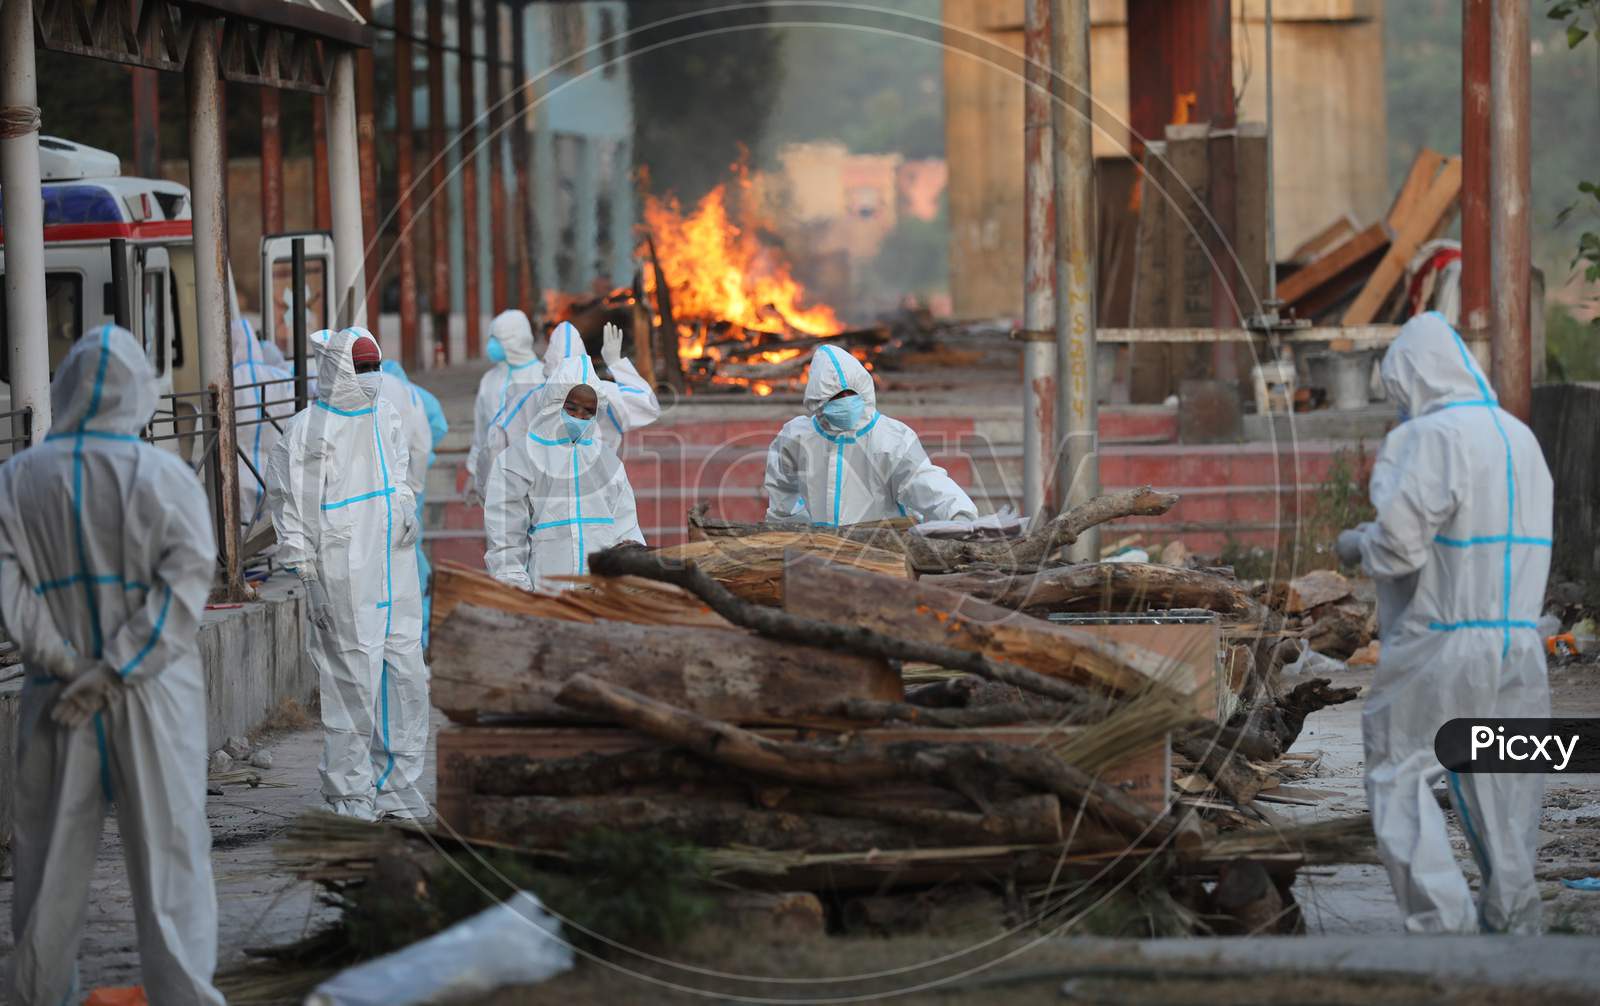 Relatives and health workers wearing protective suits cremate the  bodies of COVID-19 victims, at Jammu District,on 30 September,2020.